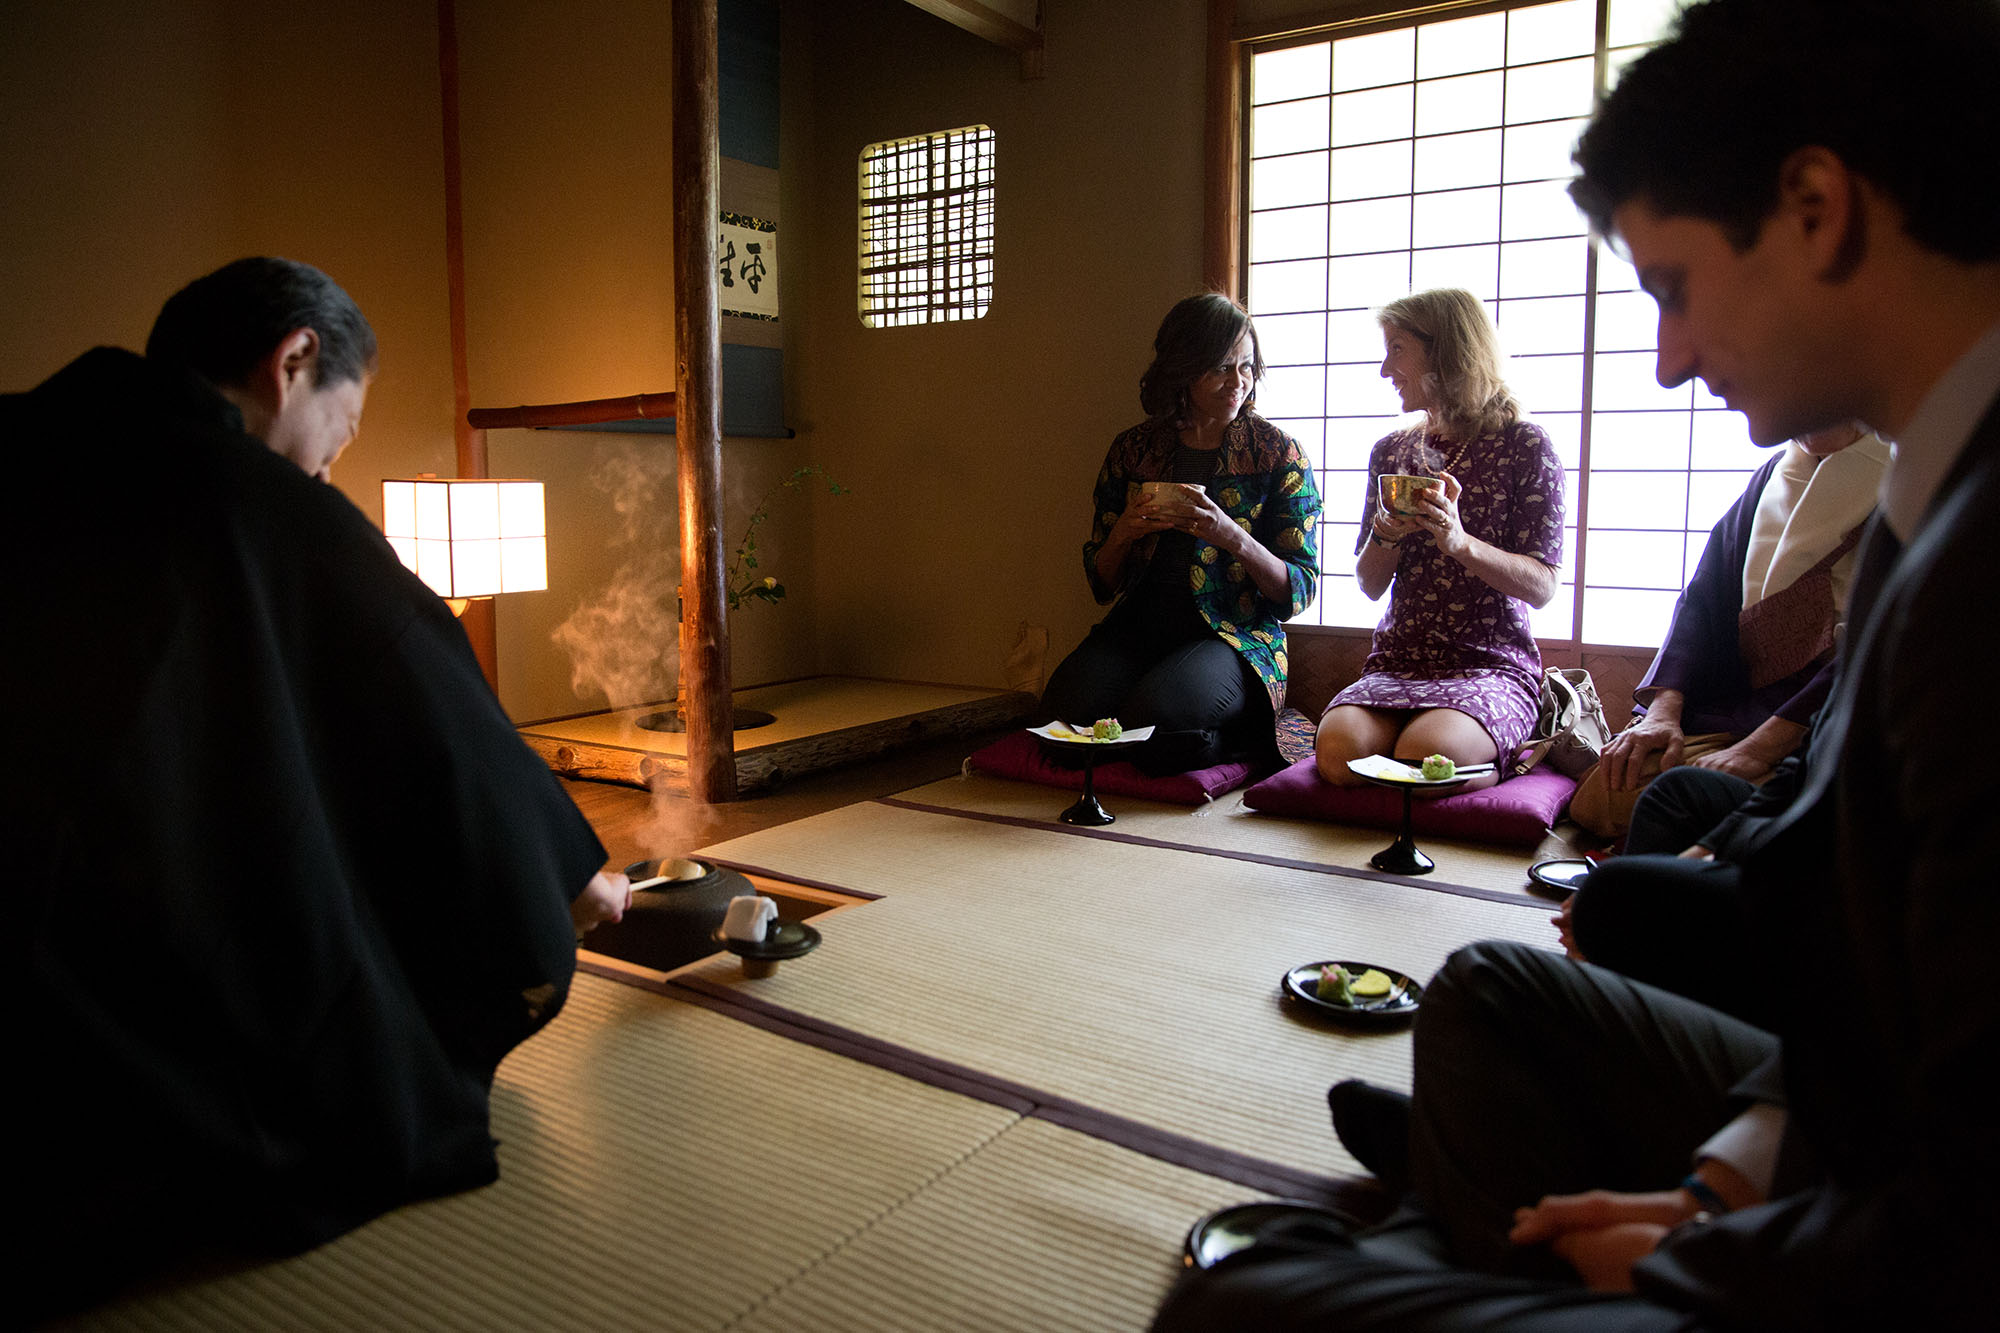 First Lady Michelle Obama, Amb. Caroline Kennedy and Jack Schlossberg participate in a tea ceremony. (Official White House Photo by Amanda Lucidon)